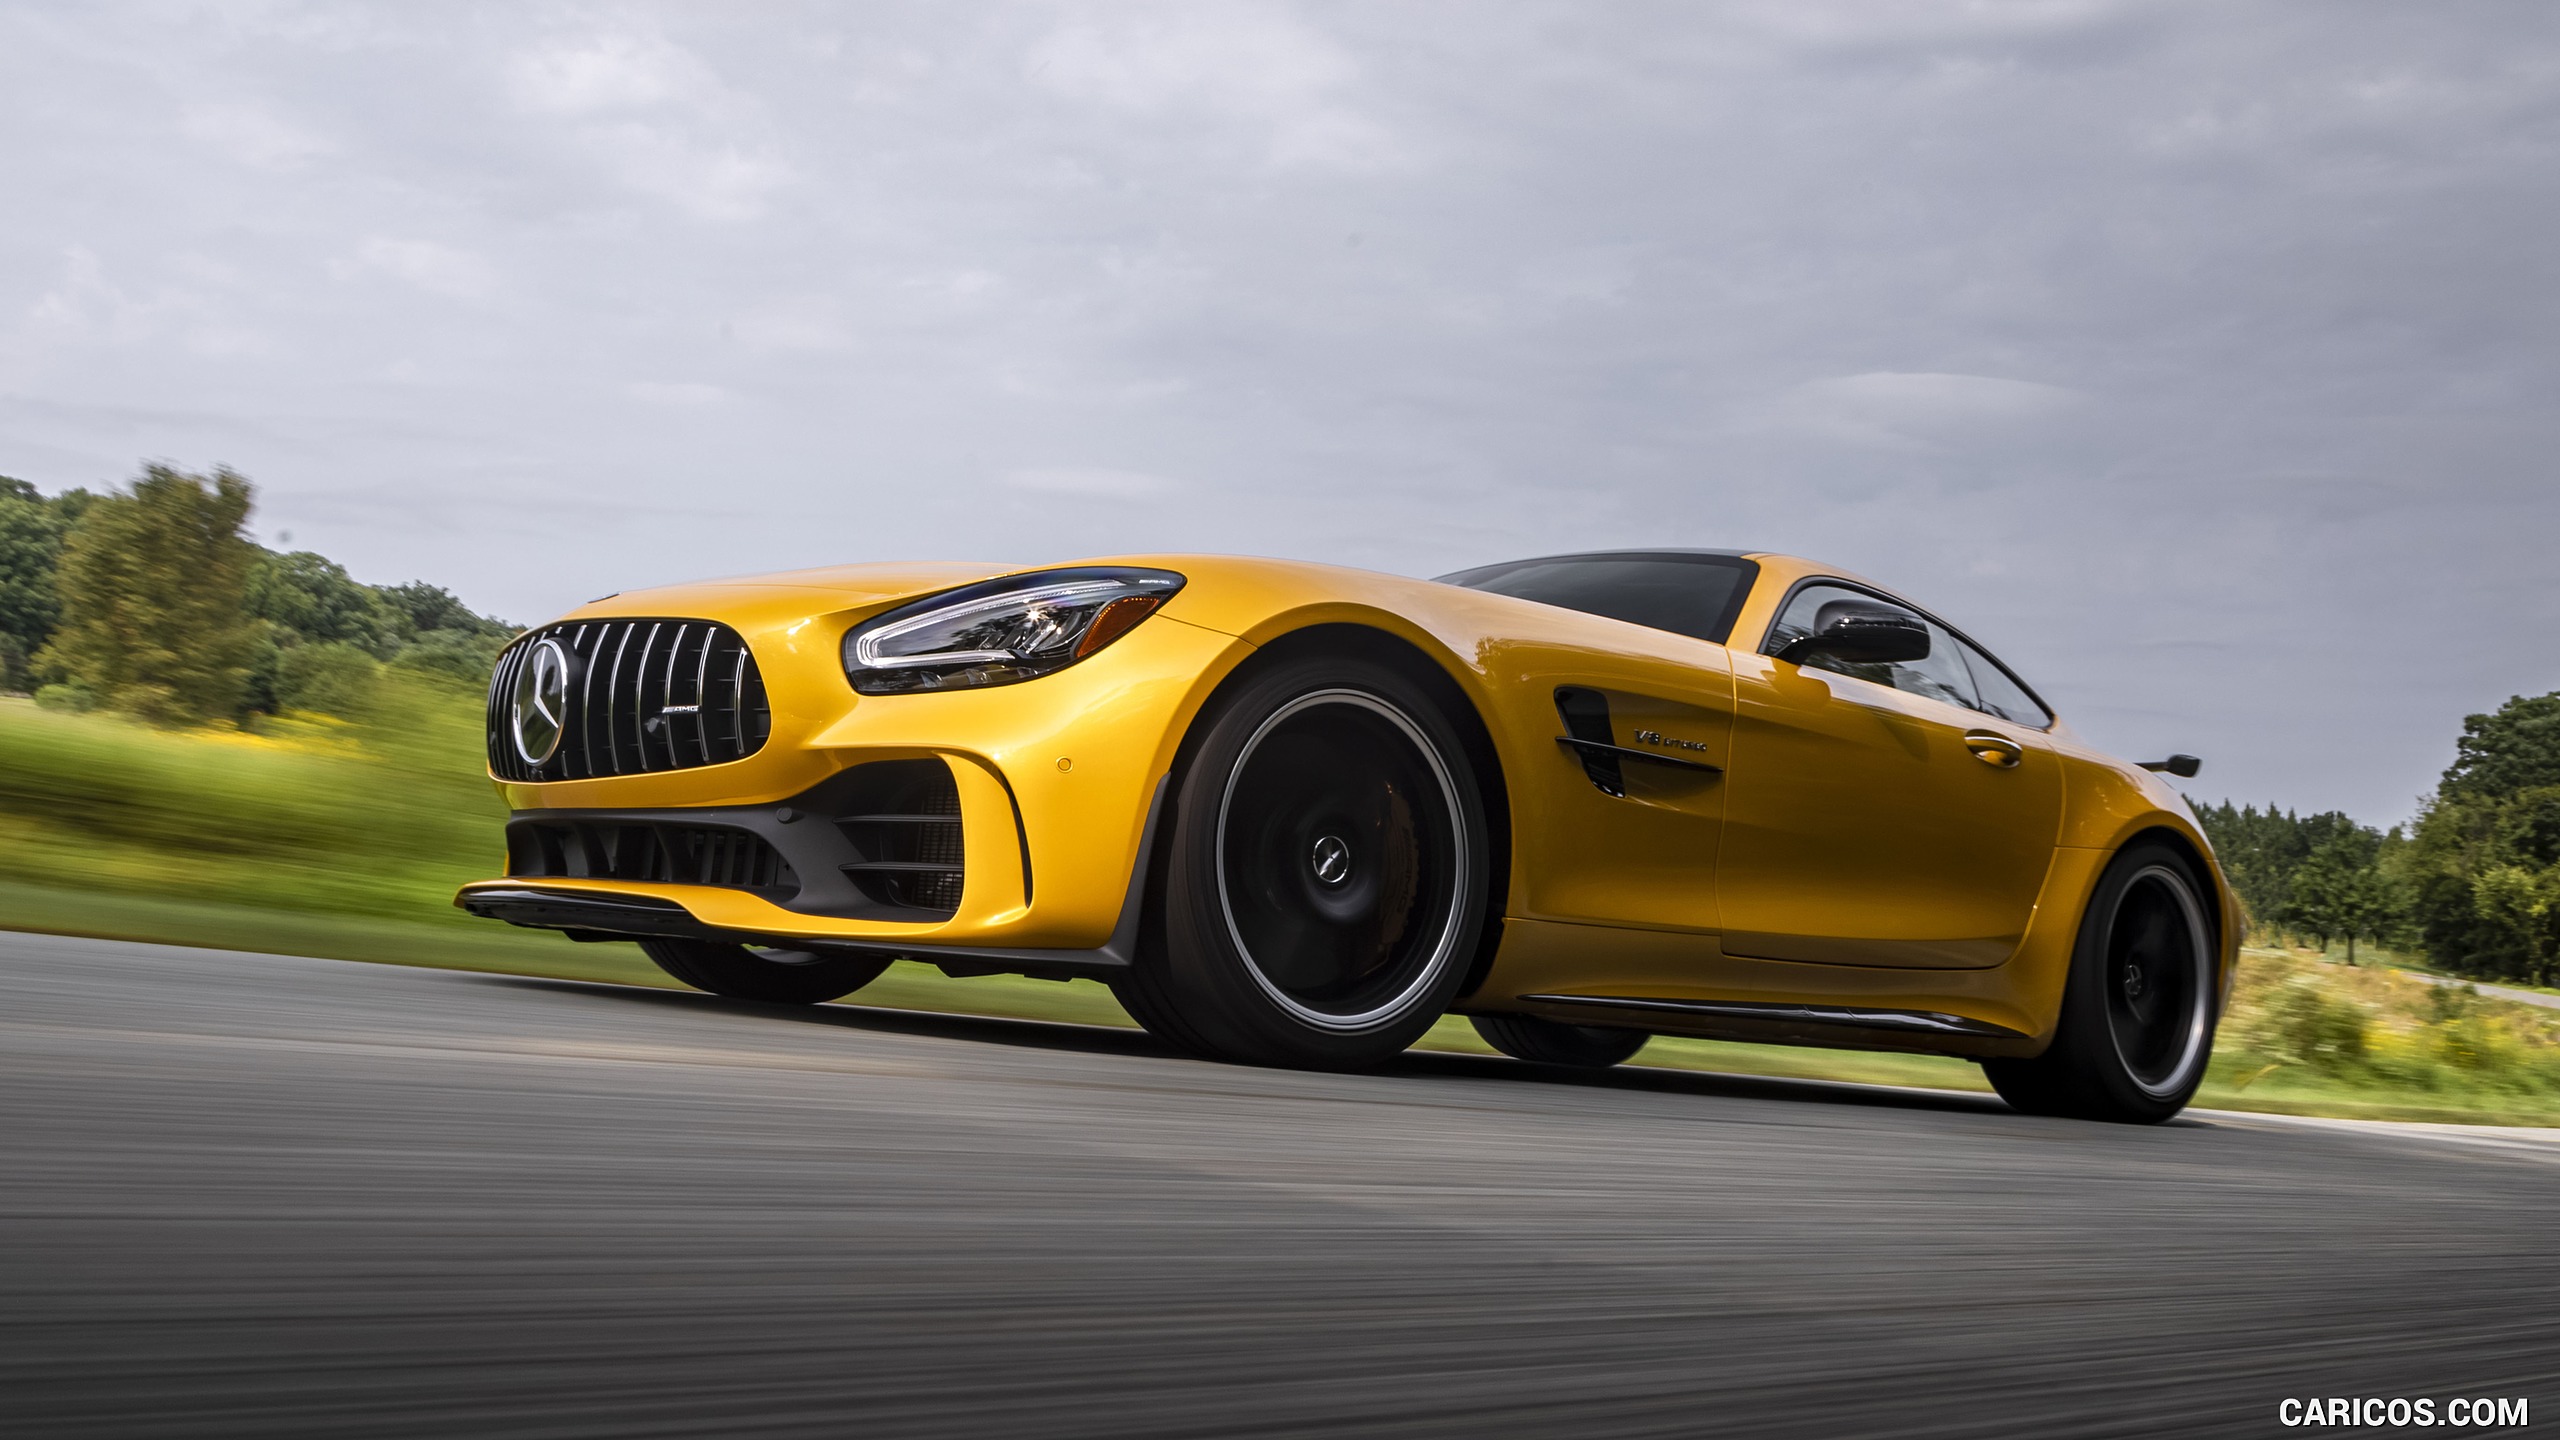 2020 Mercedes-AMG GT R Coupe (US-Spec) - Front Three-Quarter, #269 of 328